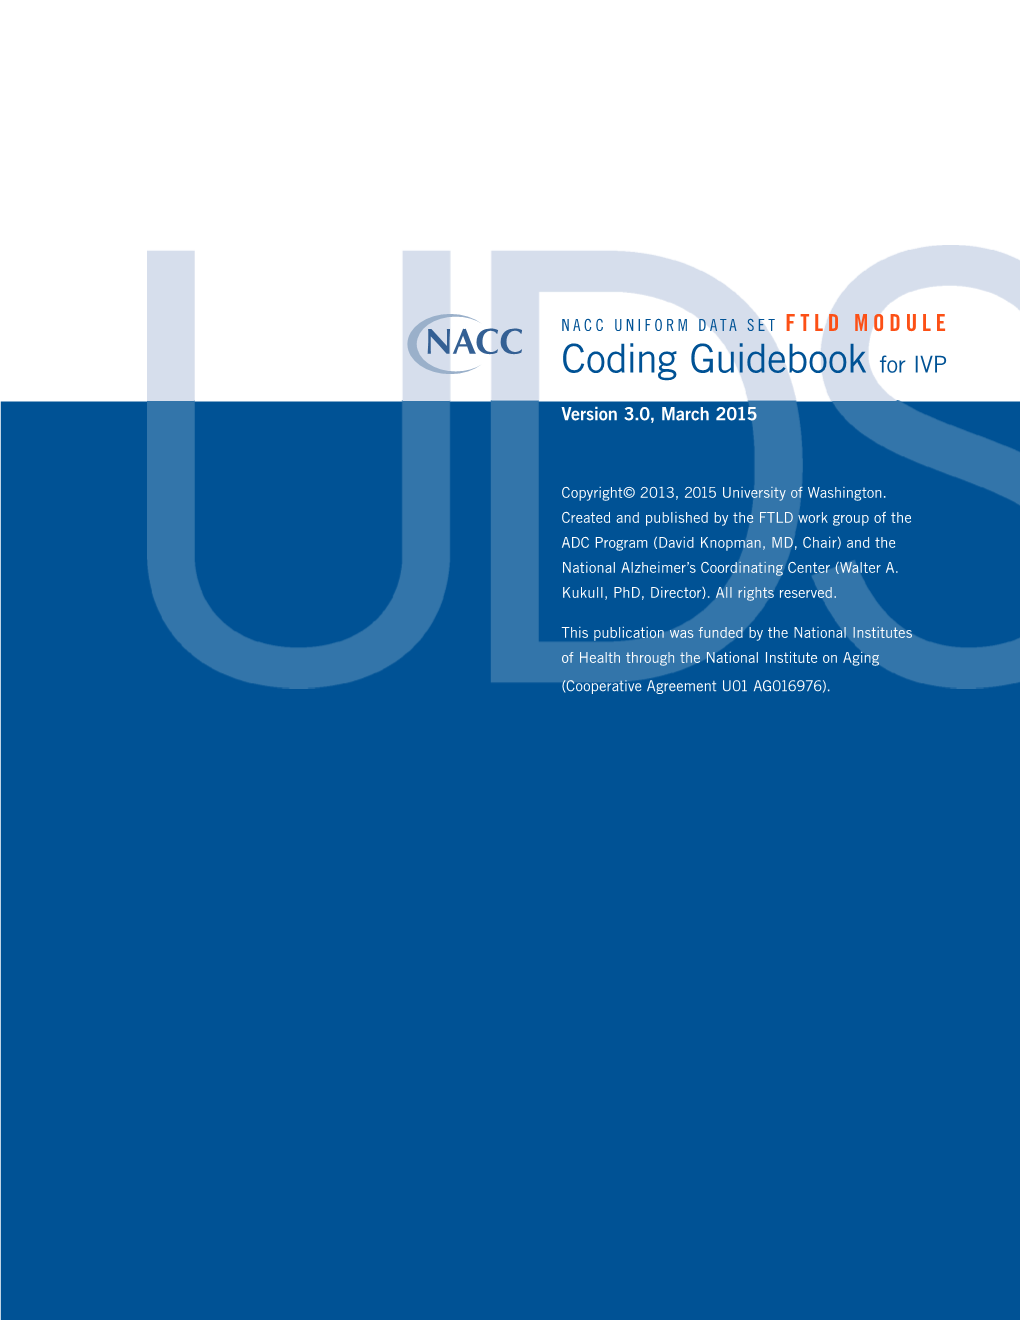 Coding Guidebook for IVP